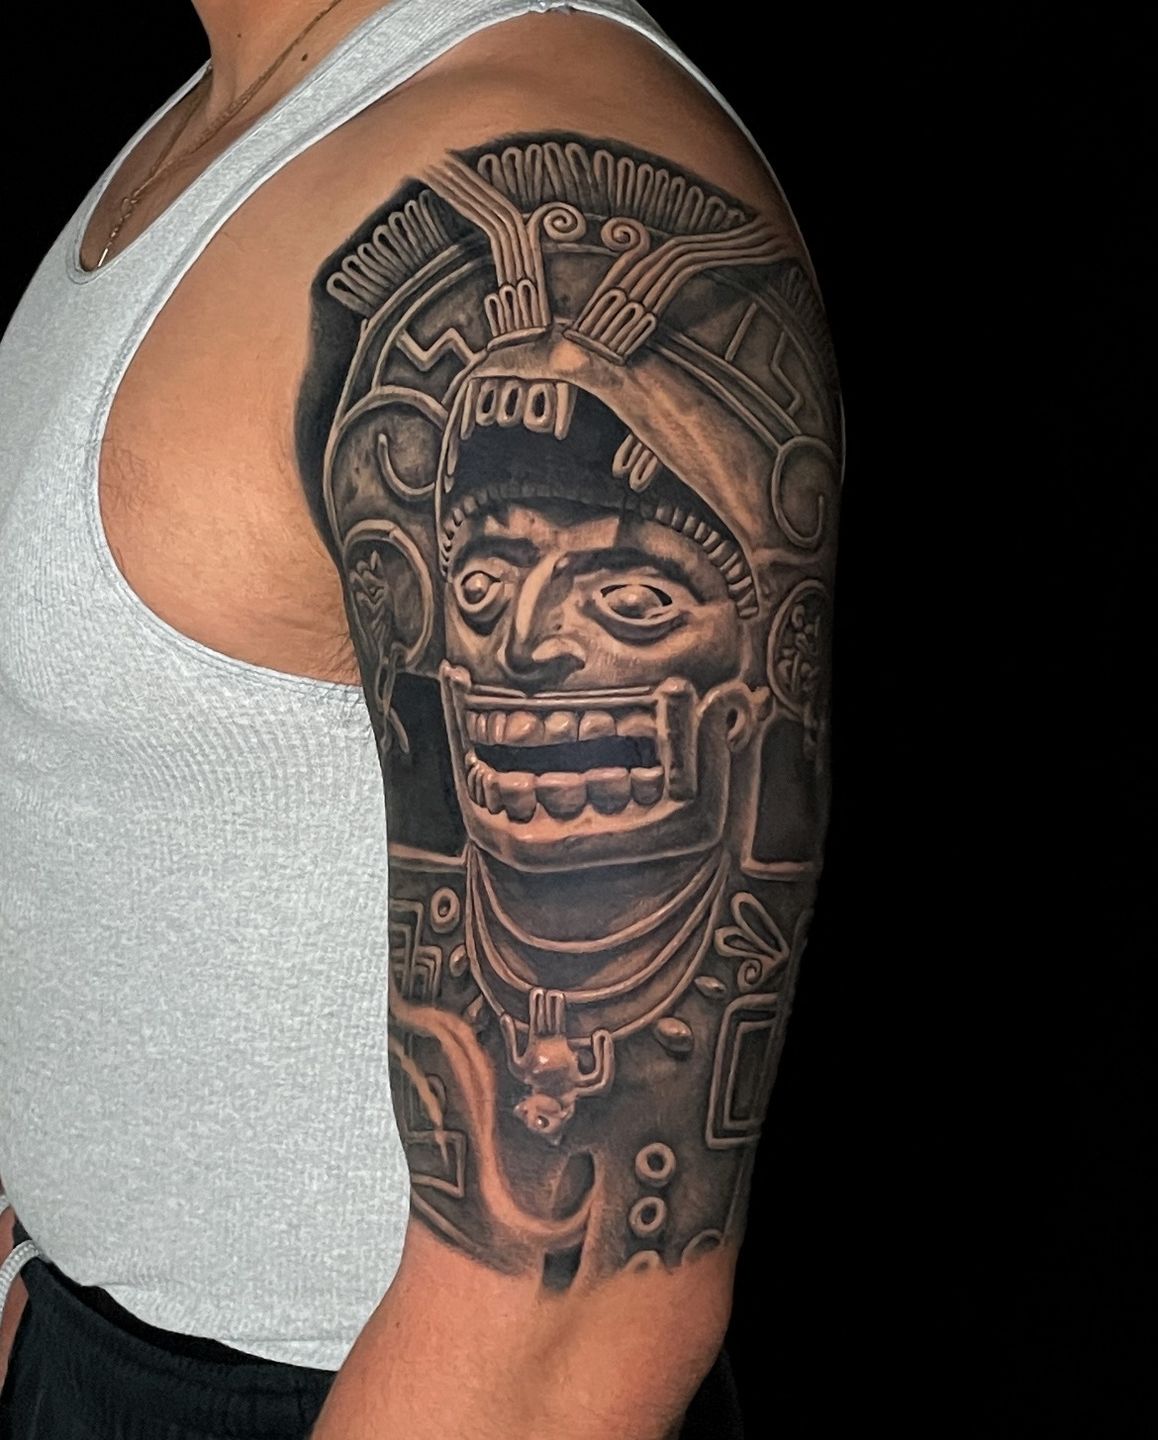 Aztec Tattoos Flash Images  Meanings  CHELSIDERMY  Oddities bones  art and taxidermy